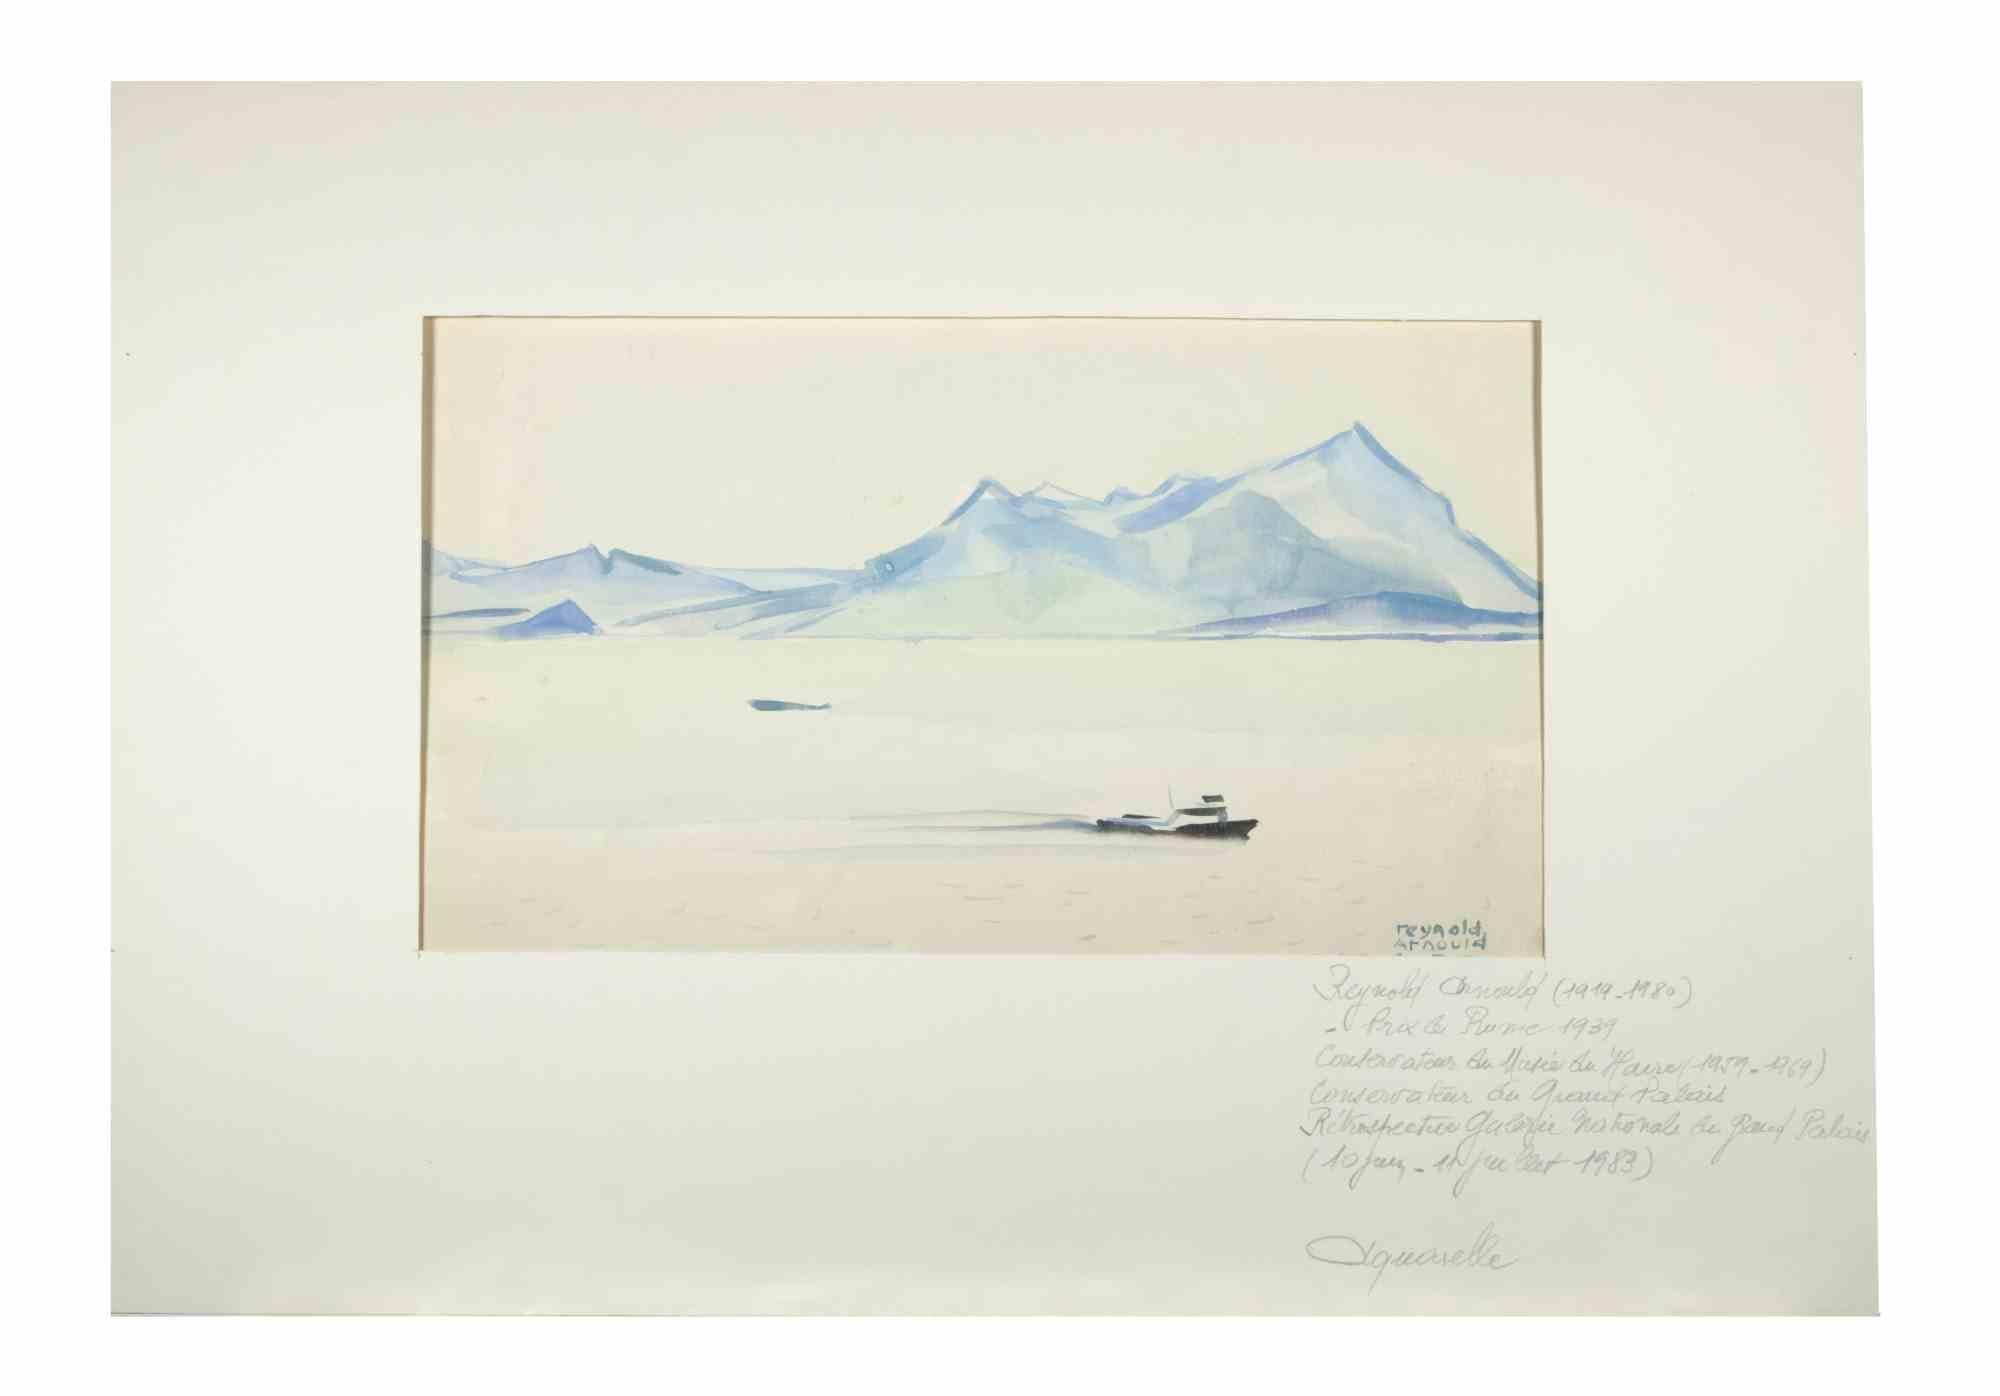 Stresa is a Watercolour artwork realized by Reynold Arnould  (Le Havre 1919 - Parigi 1980) in 1955.

Good condition included a cream colored cardboard passpartout (35x50 cm).

Hand-signed and dated by the artist on the lower right corner.

Reynold